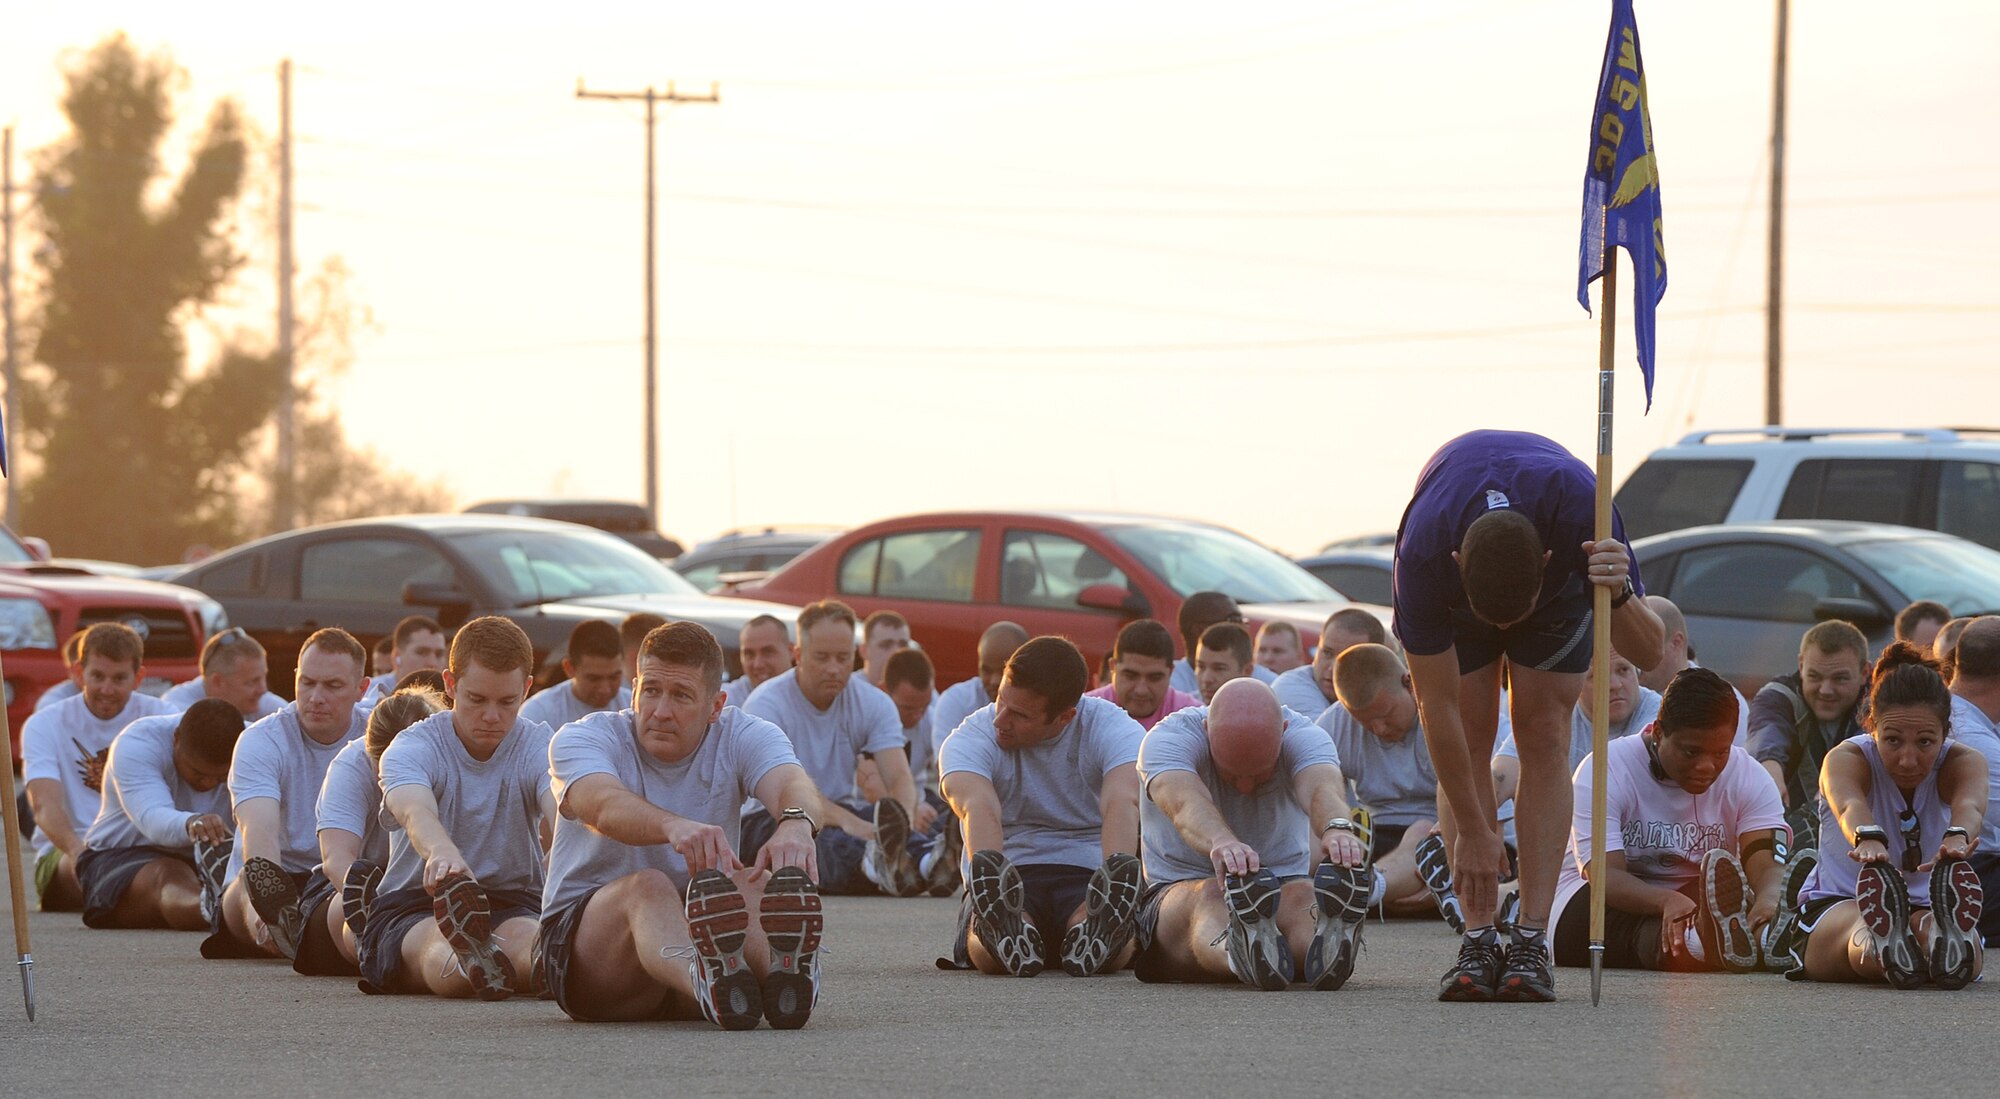 VANDENBERG AIR FORCE BASE, Calif. -- Lt. Col. Charles Vogt, the 30th Operations Support Squadron commander, stretches out with members of his squadron before taking part in the Fit-to-Fight Run here Thursday, Sept. 30, 2010. Airmen from the 30th Space Wing and the base's tenant units run together every month to ensure Airmen maintain a high standard of physical fitness. (U.S. Air Force photo/Senior Airman Ashley Reed)